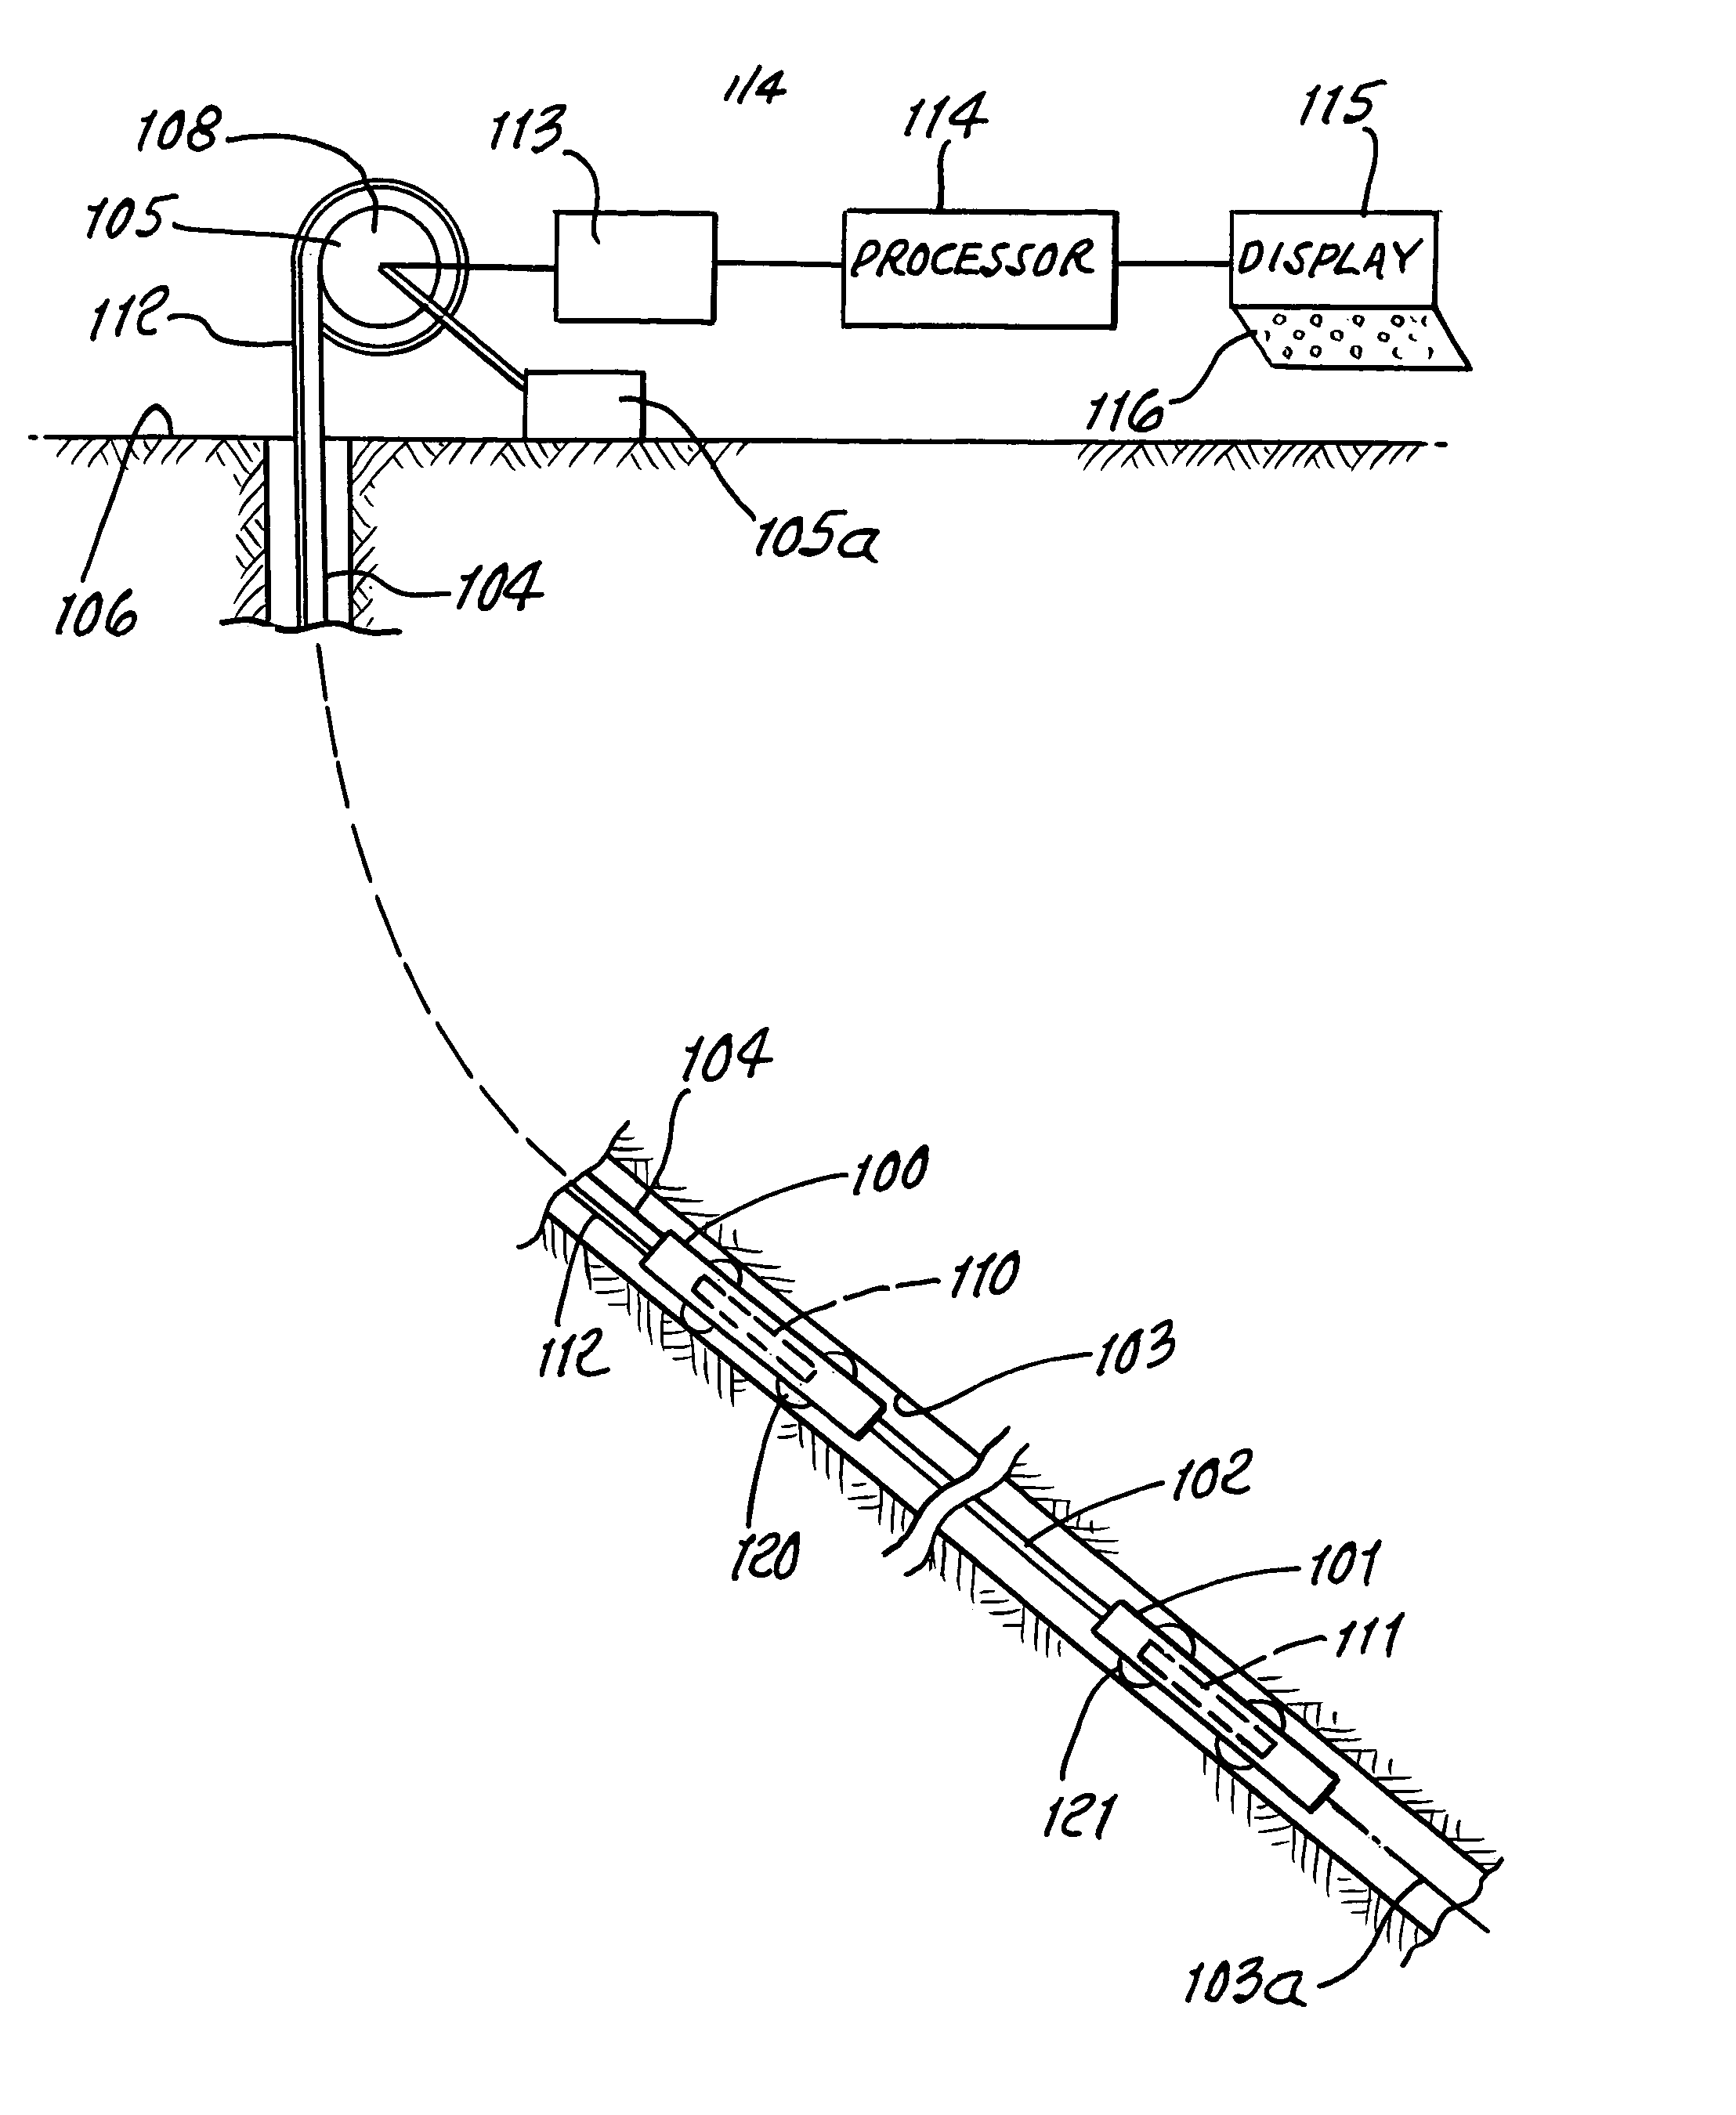 Method for computation of differential azimuth from spaced-apart gravity component measurements